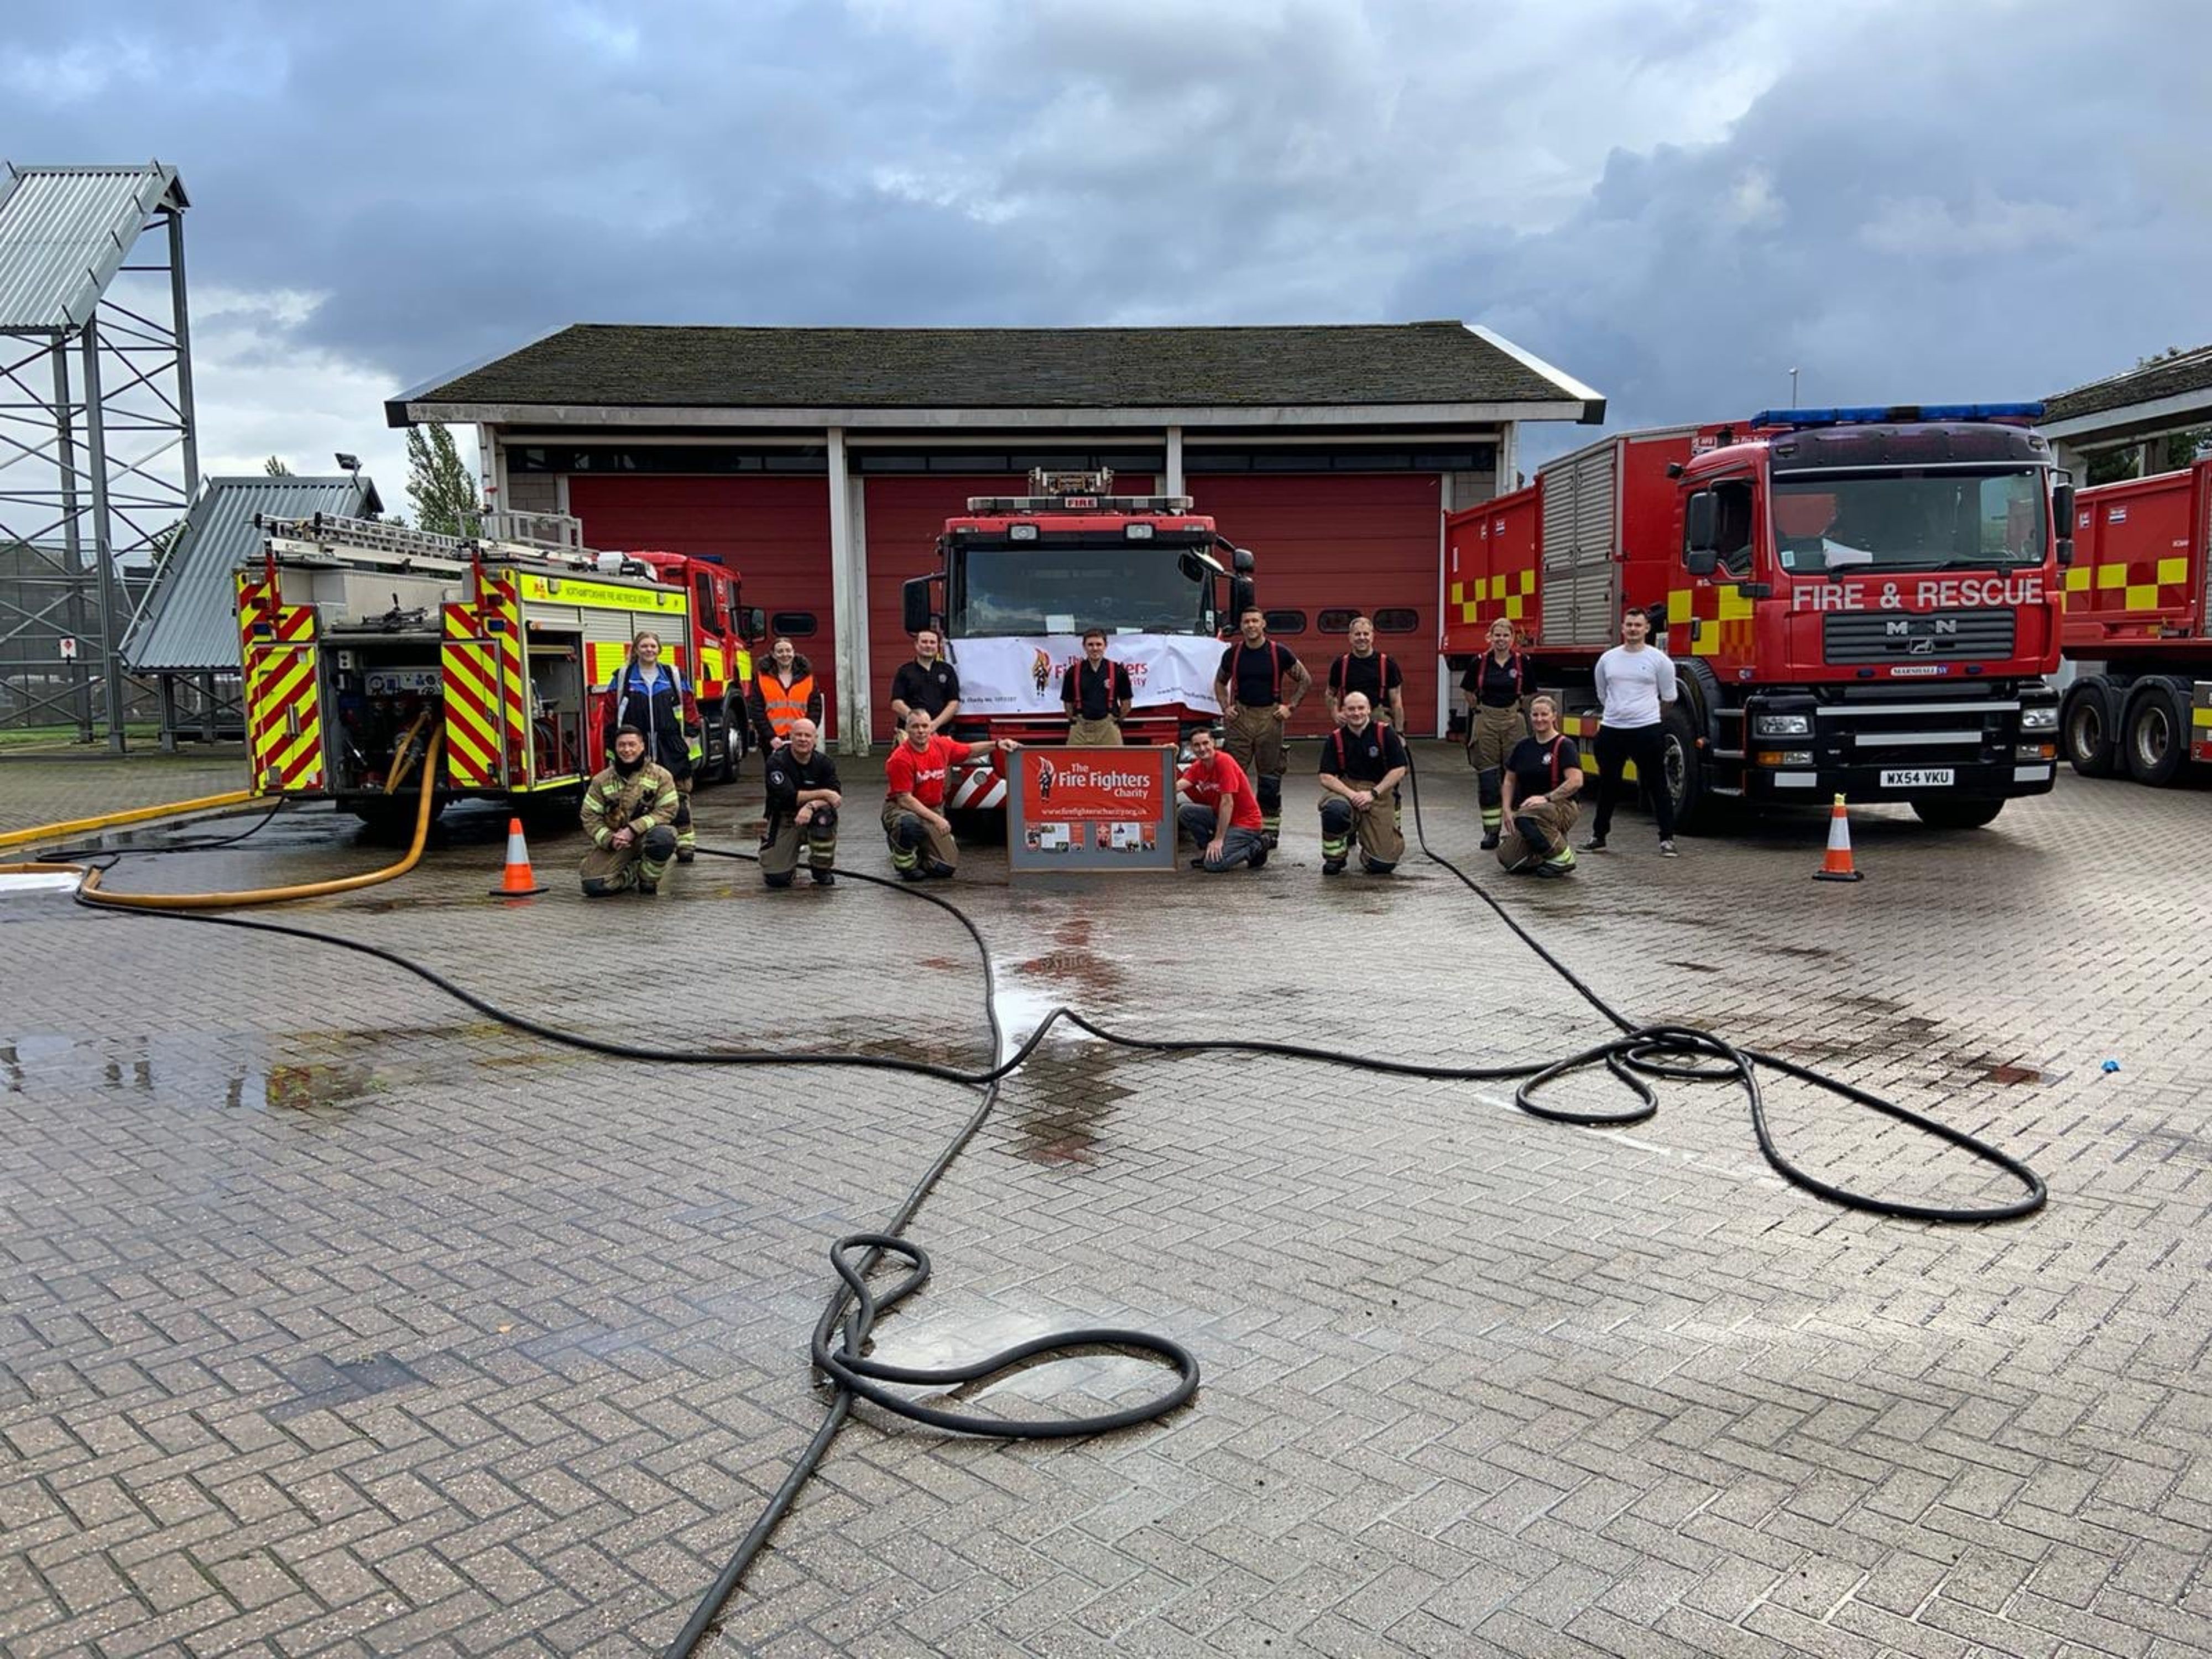 Car wash at Corby station to raise funds for The Fire Fighters Charity